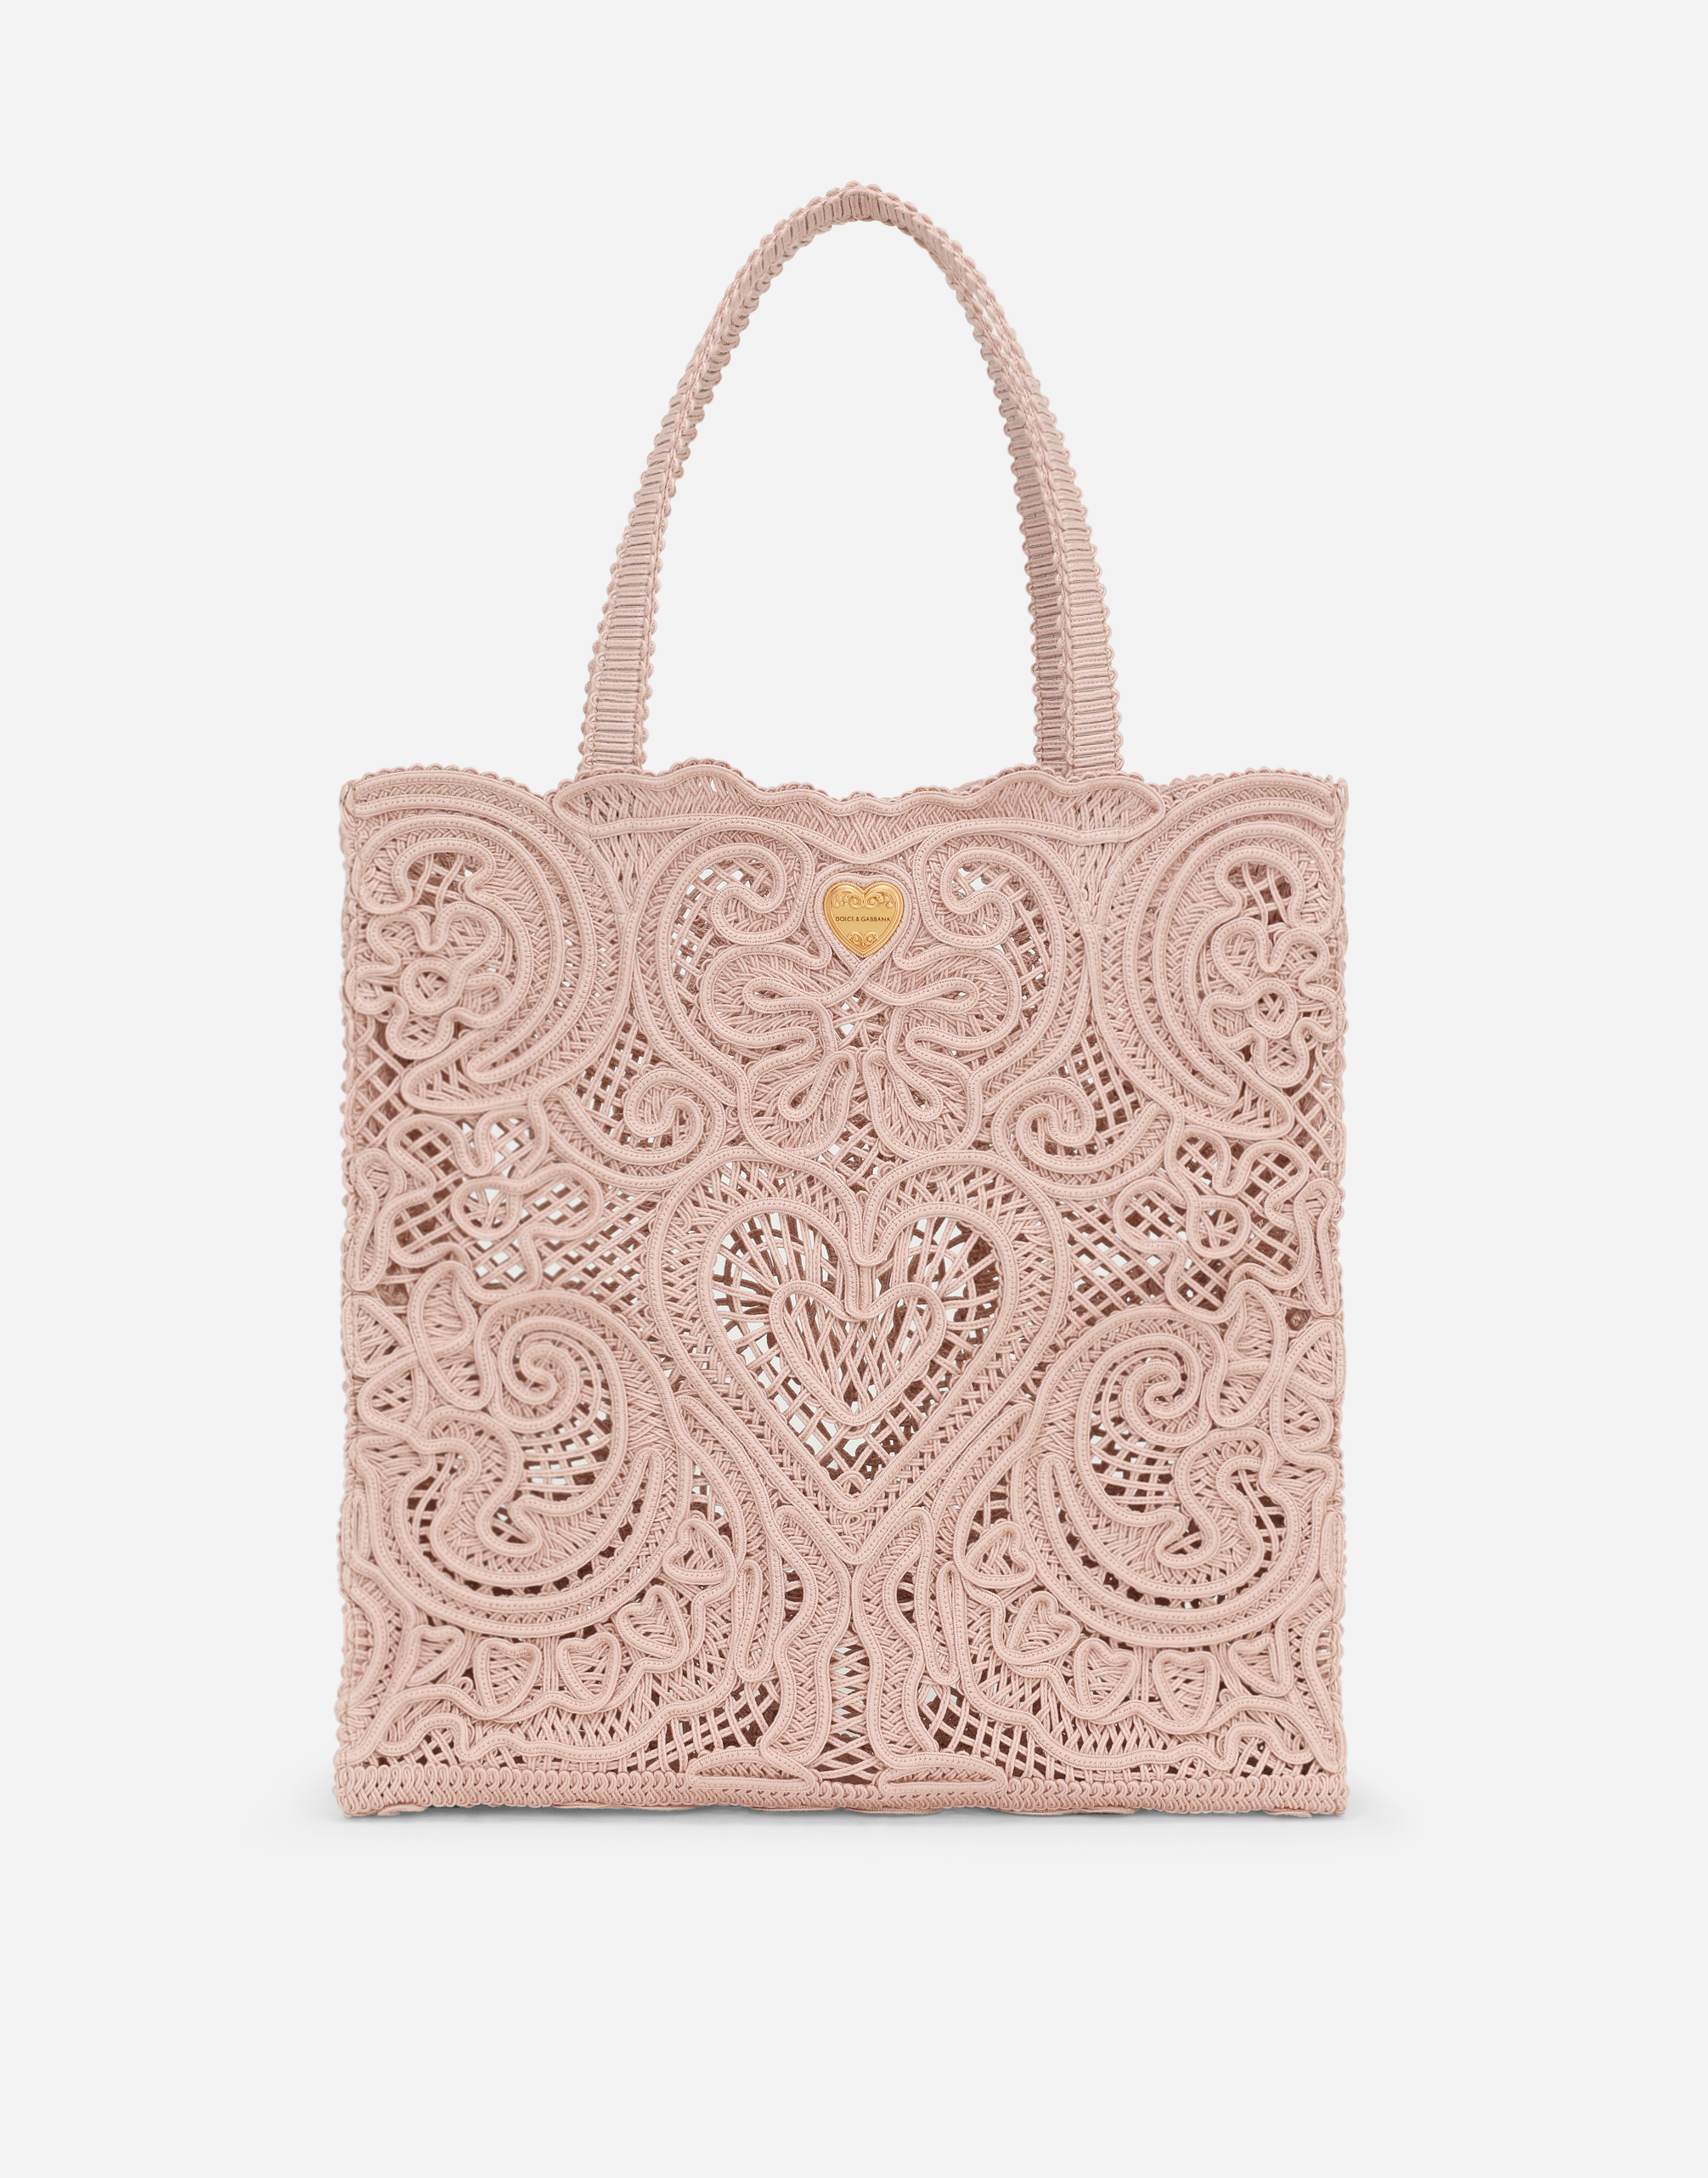 Medium shopper with cordonetto embroidery in Pale Pink